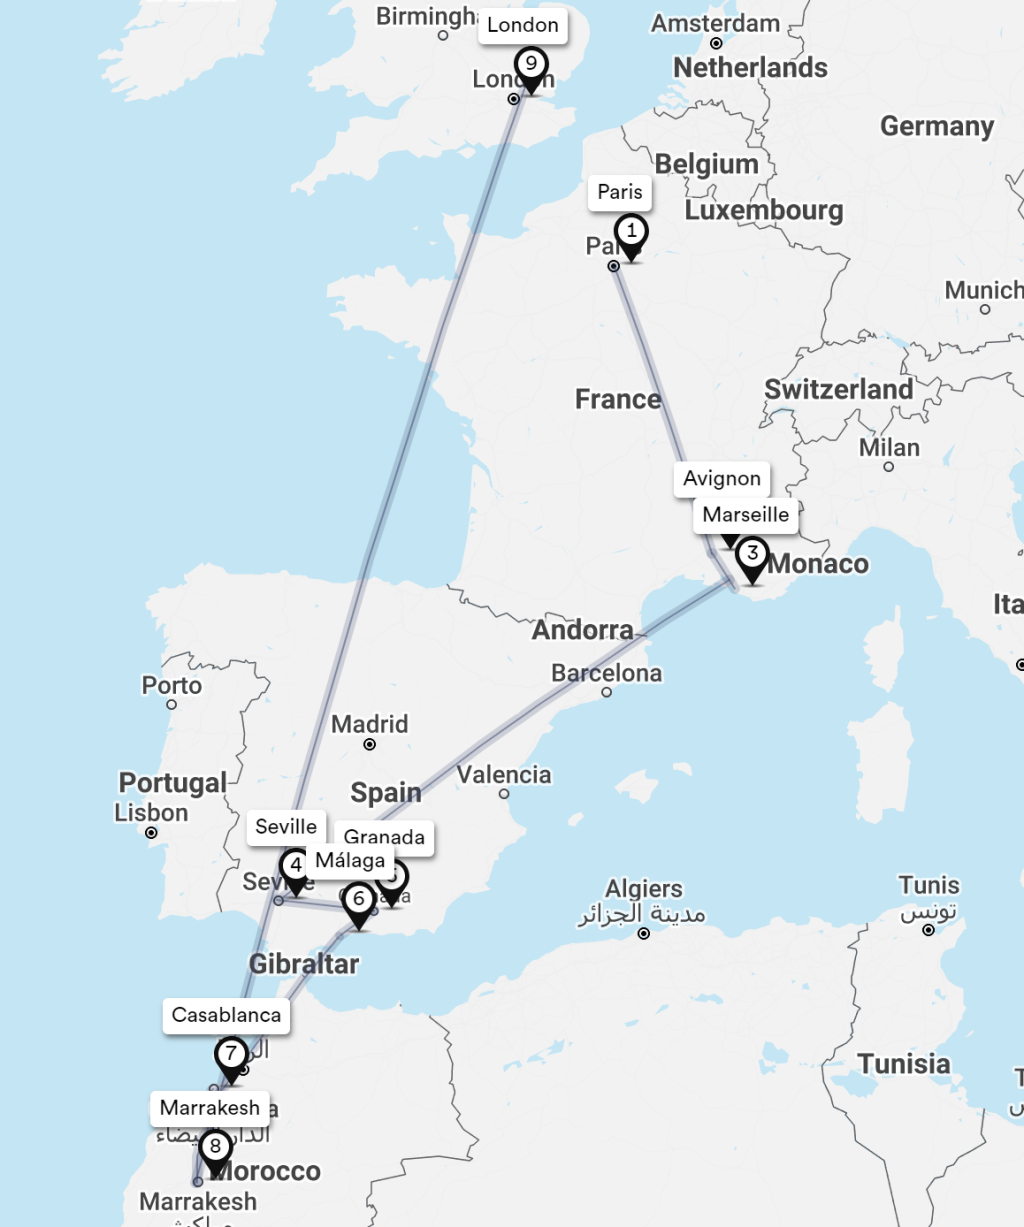 trip itinerary for europe - Our  Travel Plans: Europe Travel Itinerary -  Cups of Travel